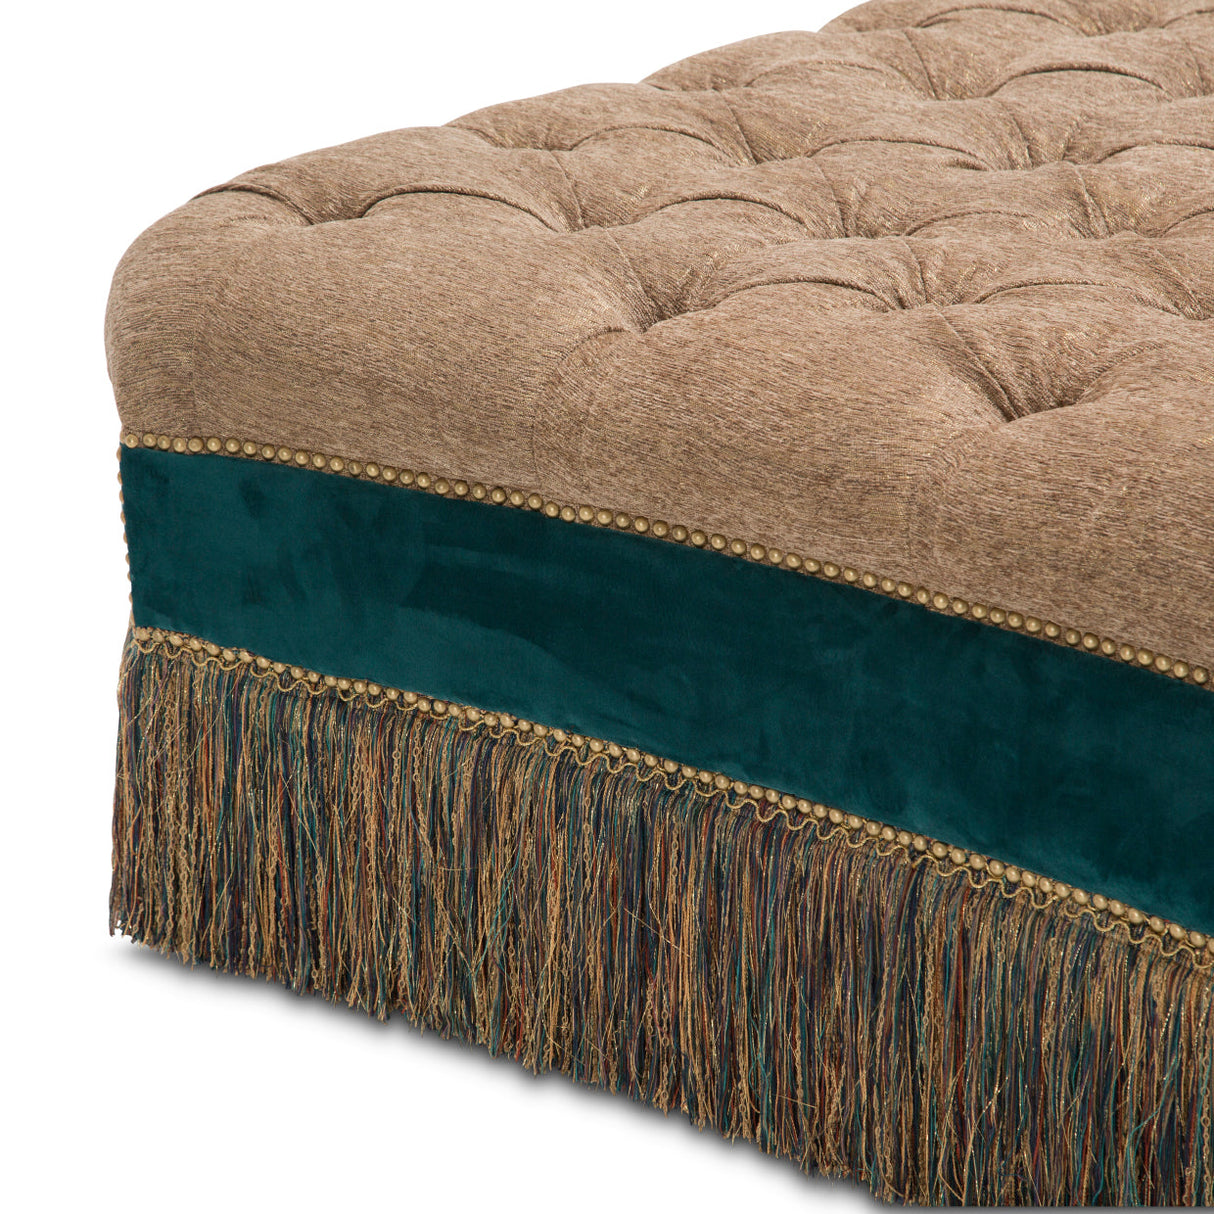 Aico Furniture - Grand Masterpiece Cocktail Ottoman - 9050879-Angld-00 - Clearance